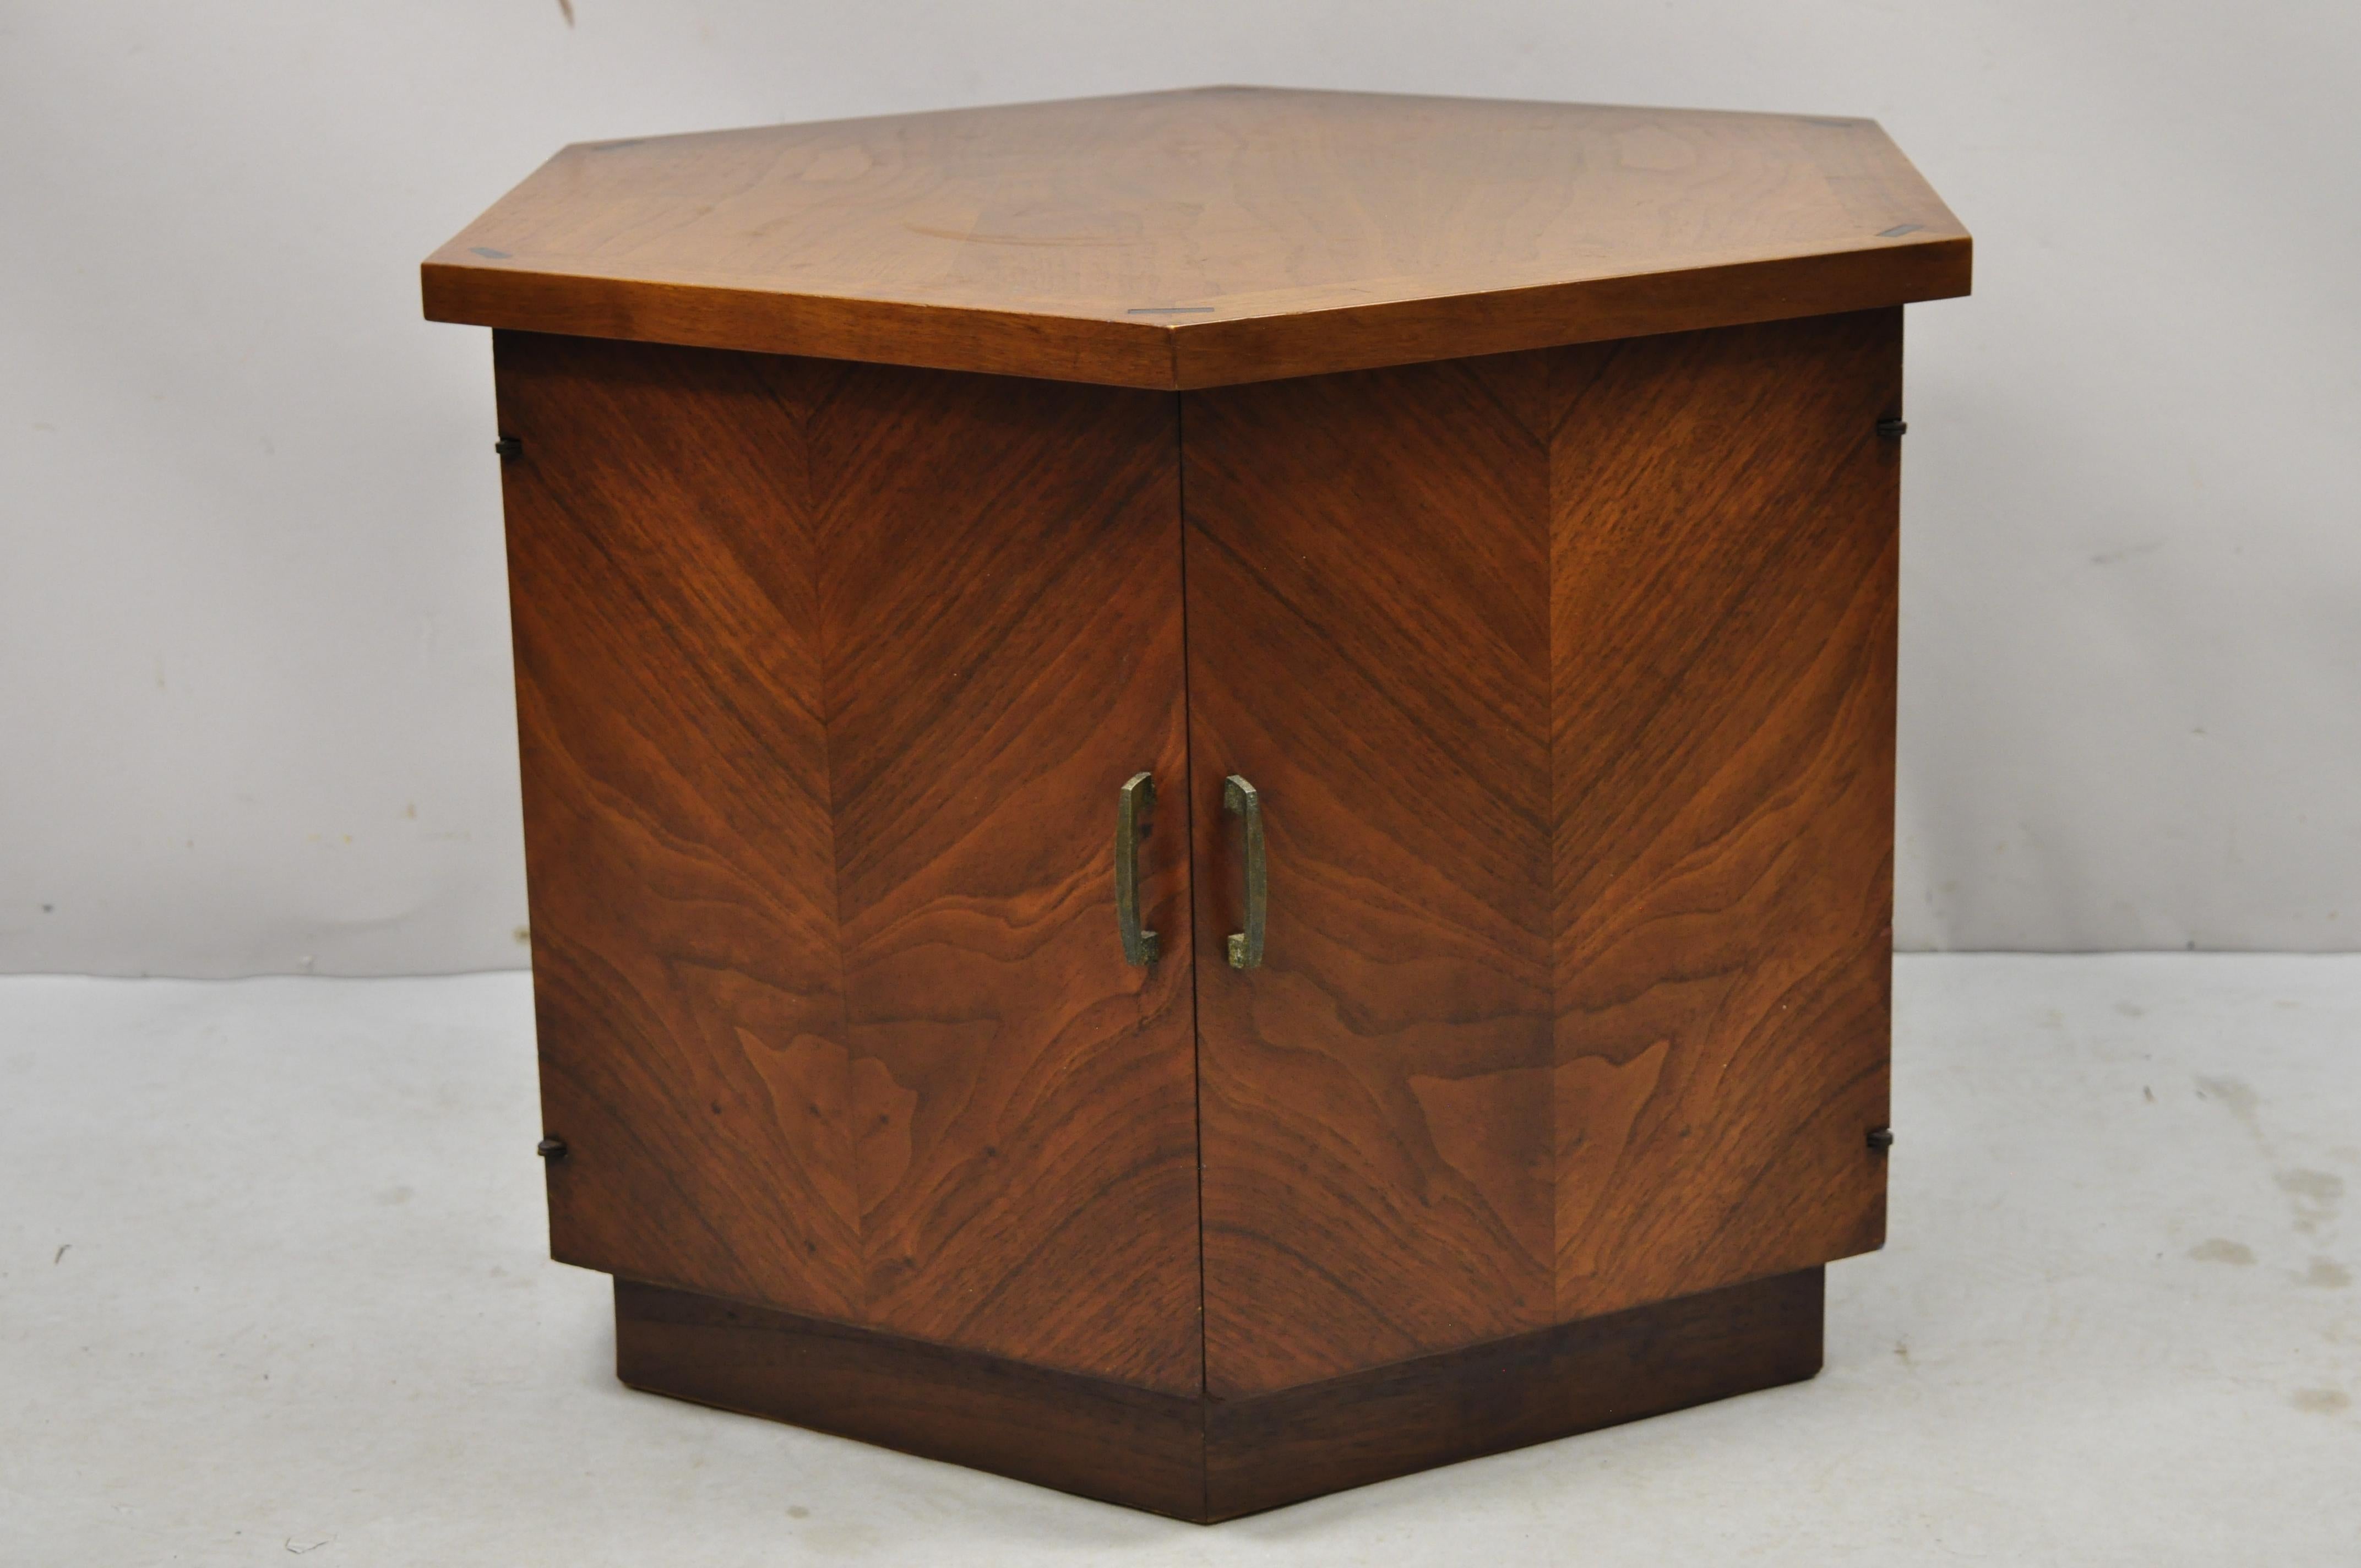 Lane Altavista Mid-Century Modern walnut 2 door side drum end table cabinet. Item features a beautiful wood grain, 2 swing doors, very nice vintage item, quality American craftsmanship, great style and form. Circa mid-20th century. Measurements: